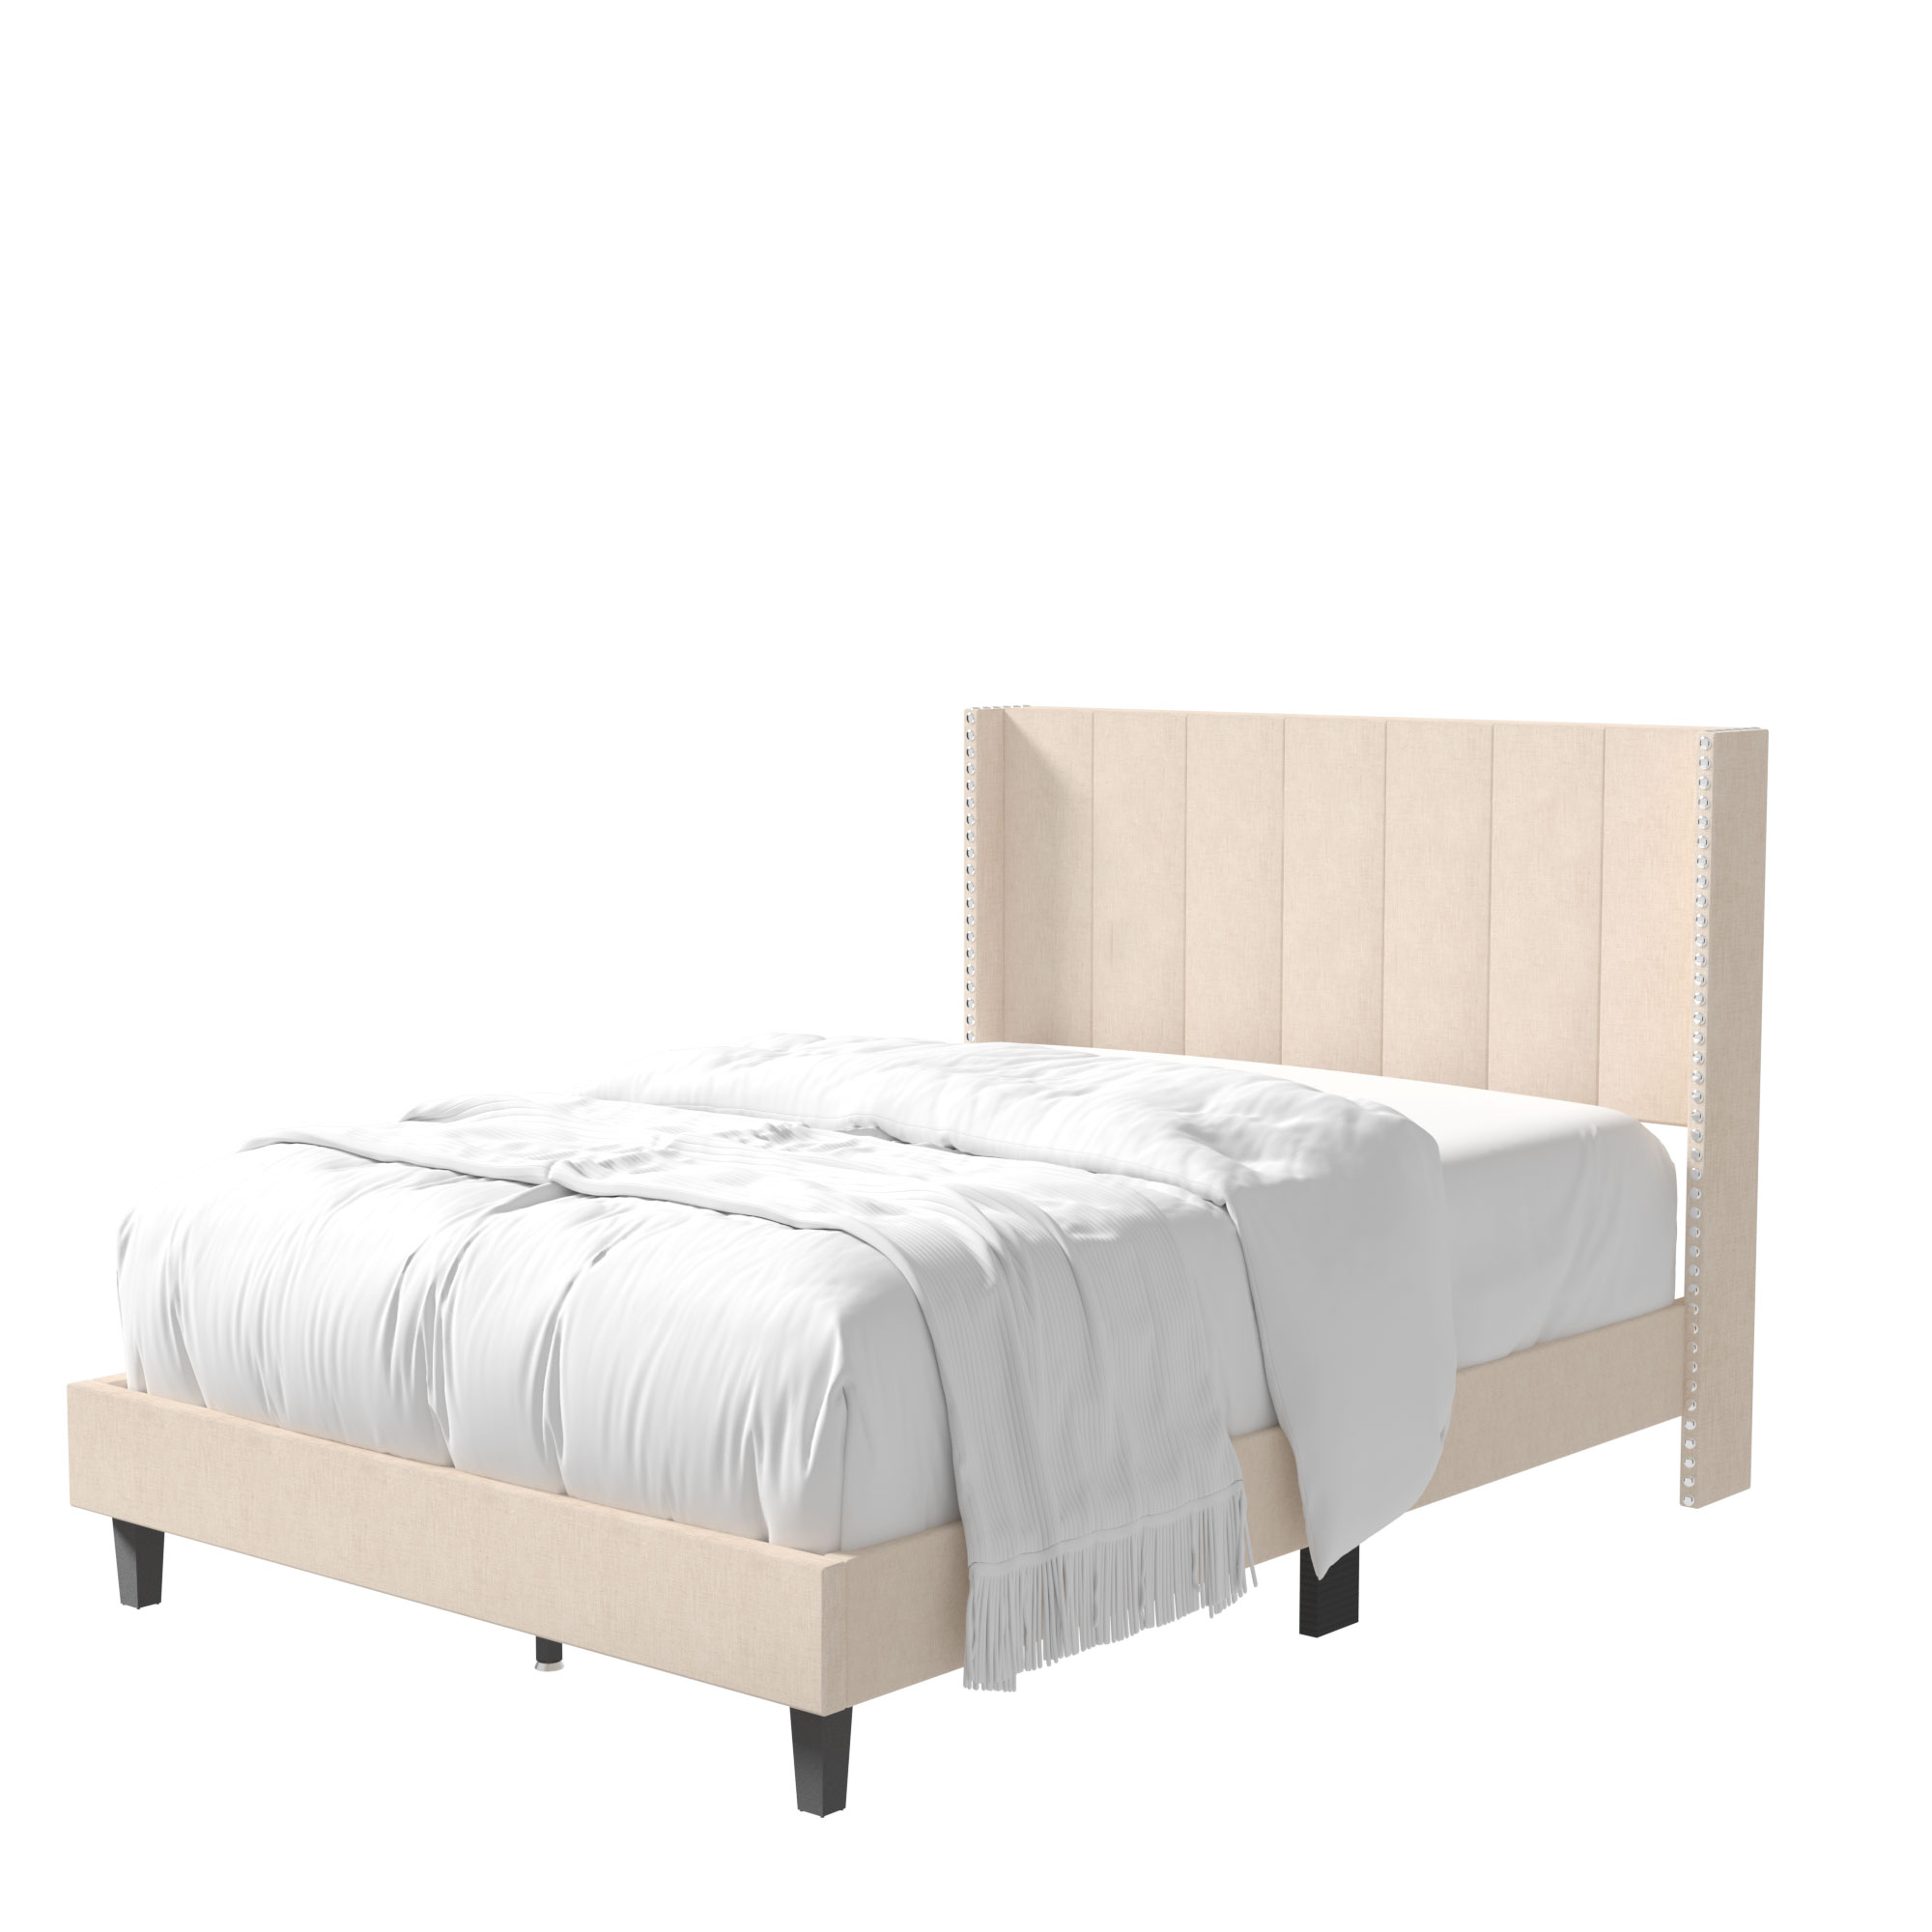 Bed Frame Set, Beds Headboard with Wings  Platform  Slats, Fabric/Full Size/Beige